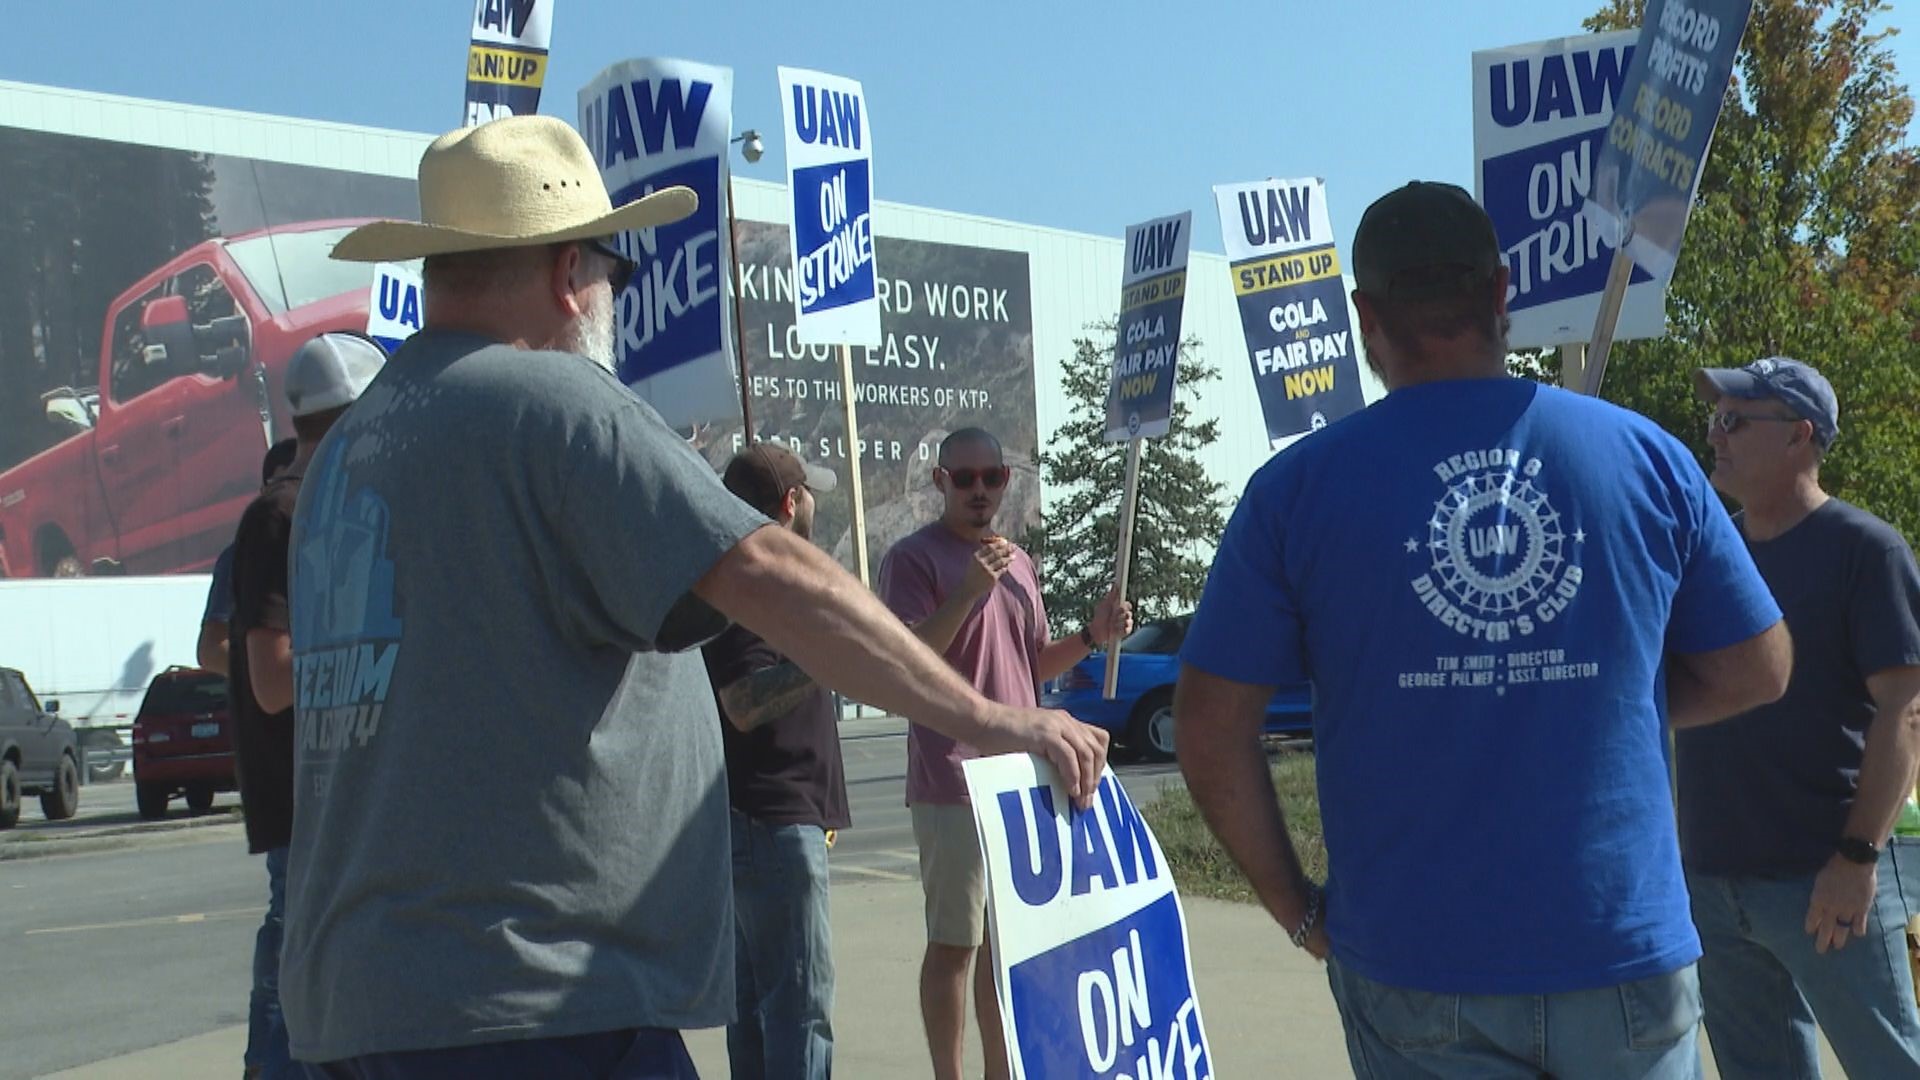 The national United Auto Workers (UAW) union told workers to "stand up" and strike late Wednesday evening.